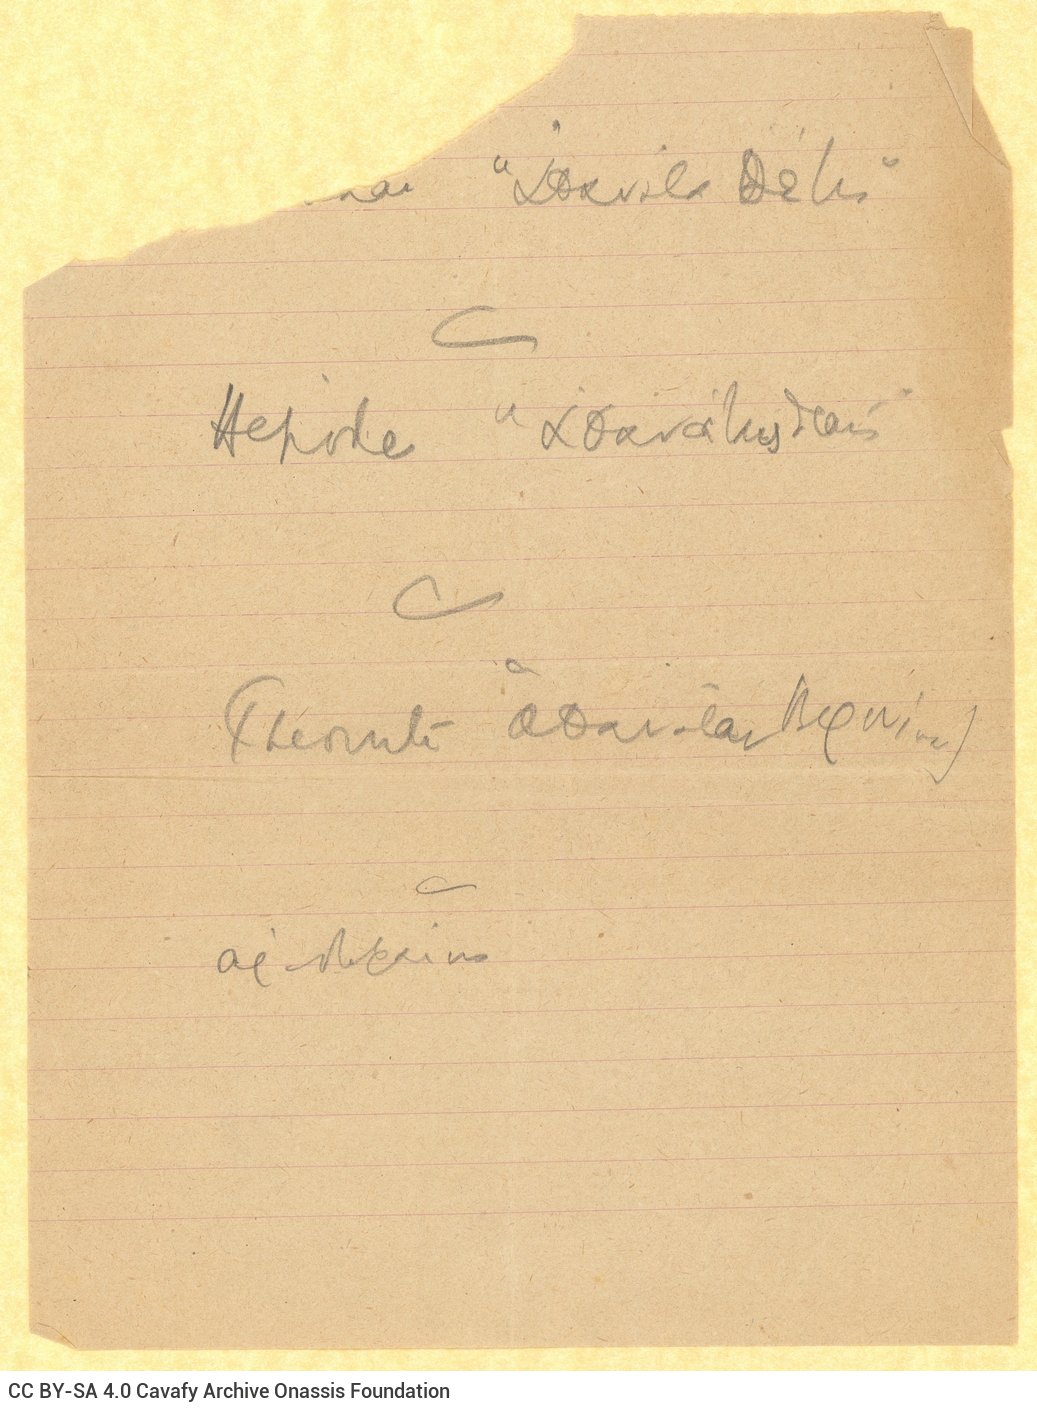 Handwritten notes by Cavafy on the rectos of two sheets. Blank versos. Reference to an article by Catraro and notes of lin